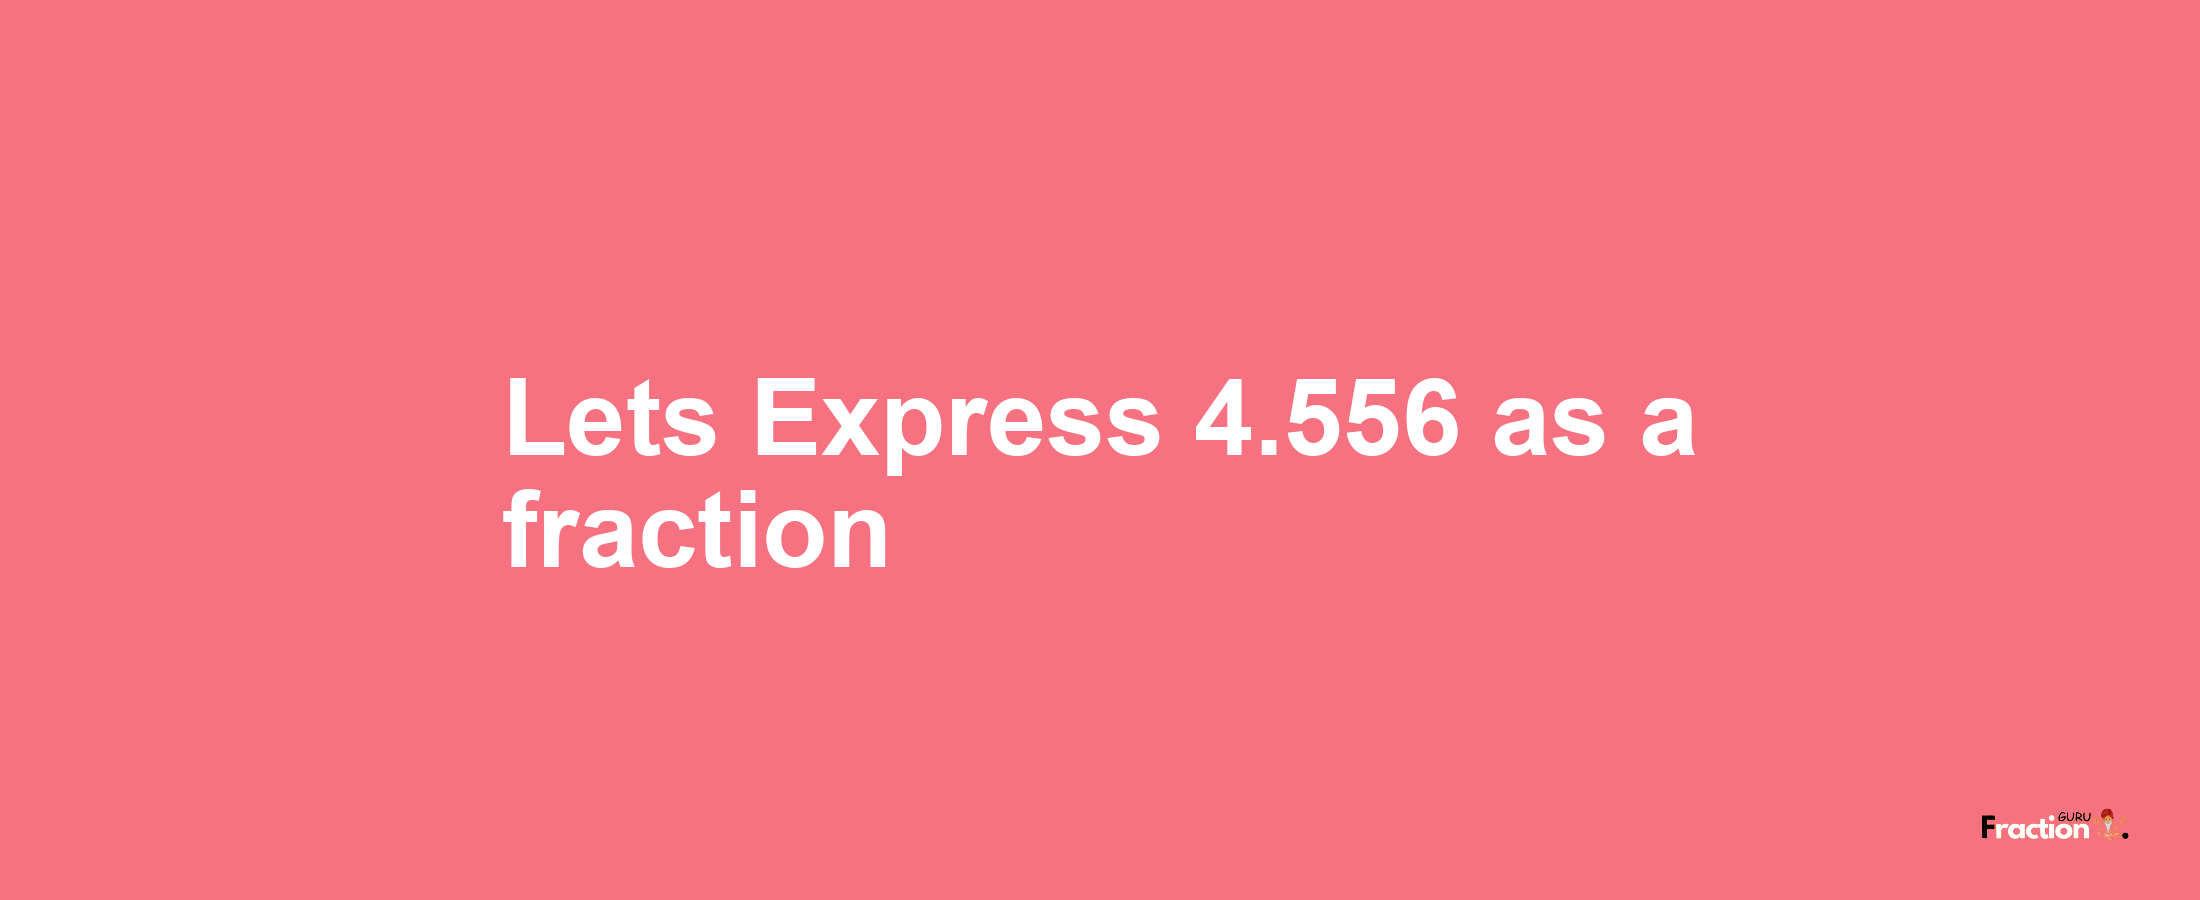 Lets Express 4.556 as afraction